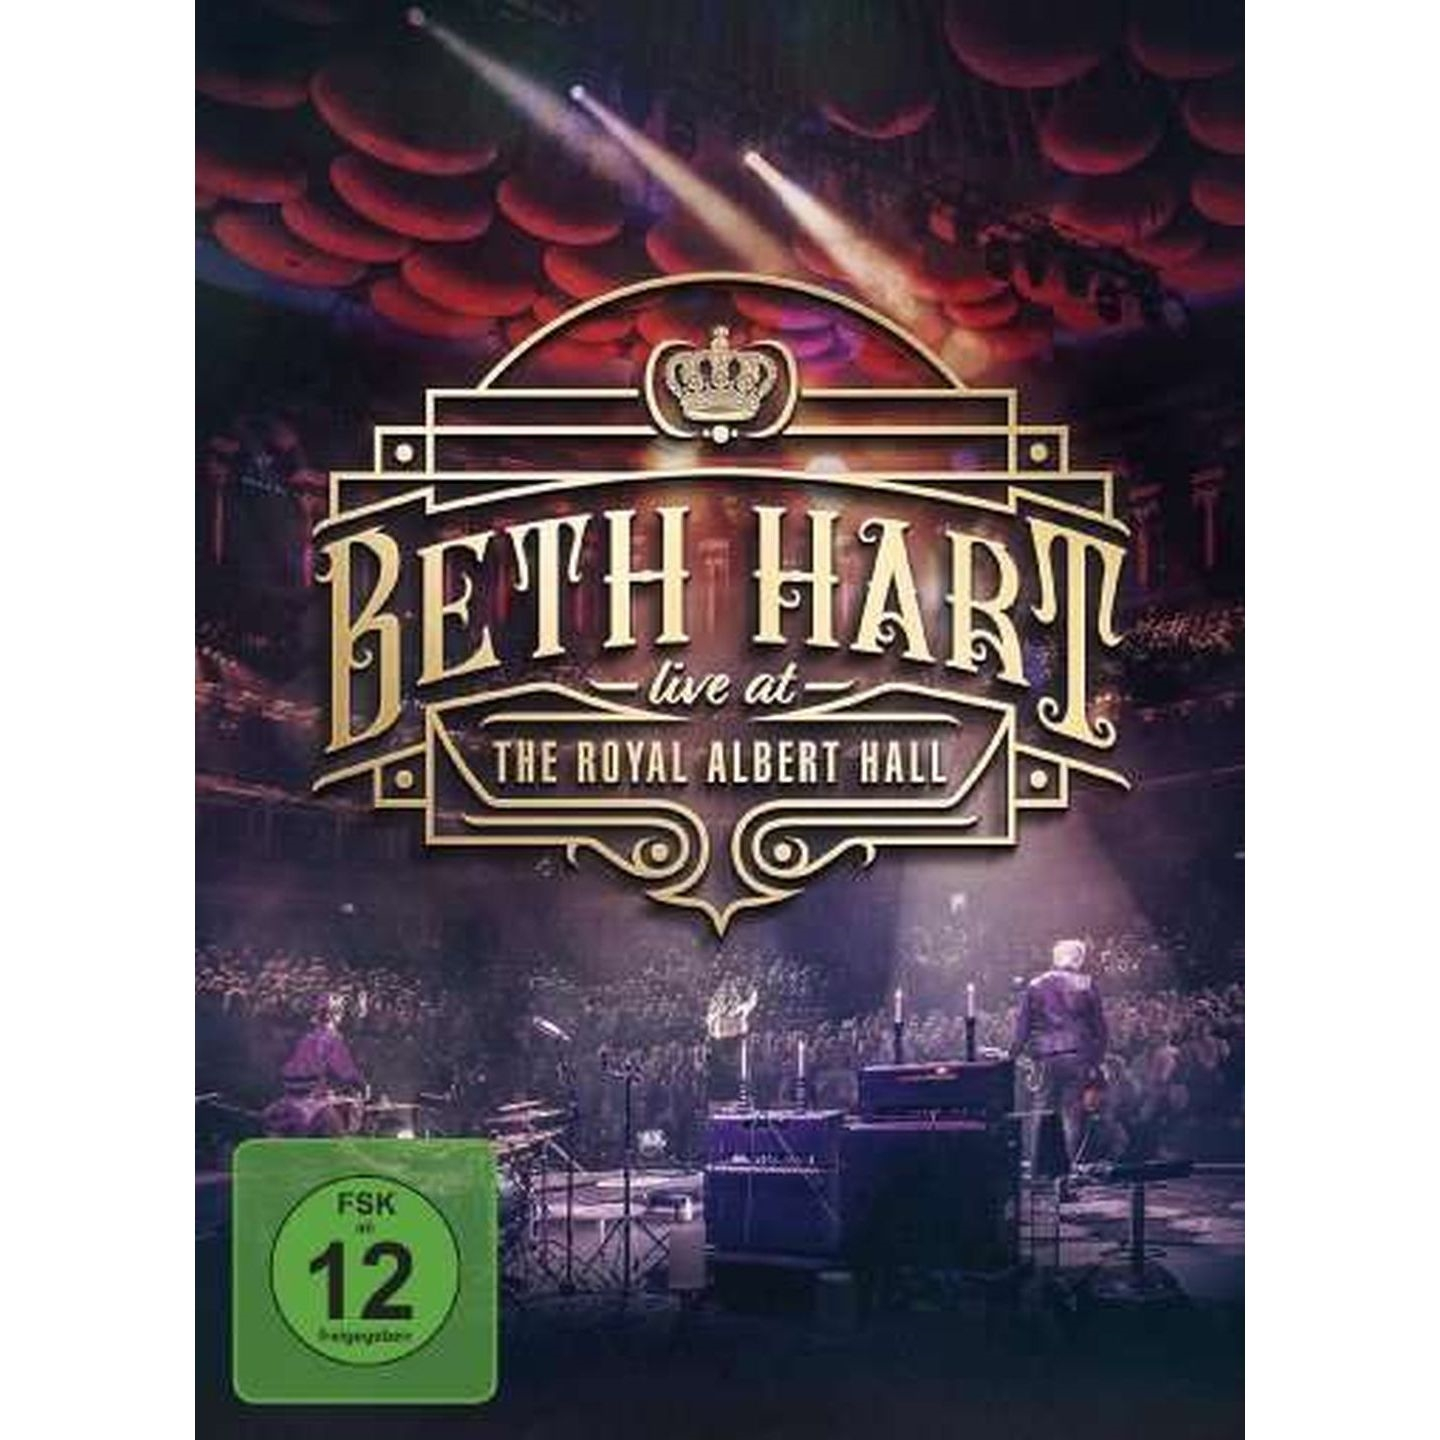 LIVE FROM ROYAL ALBERT HALL [DVD]